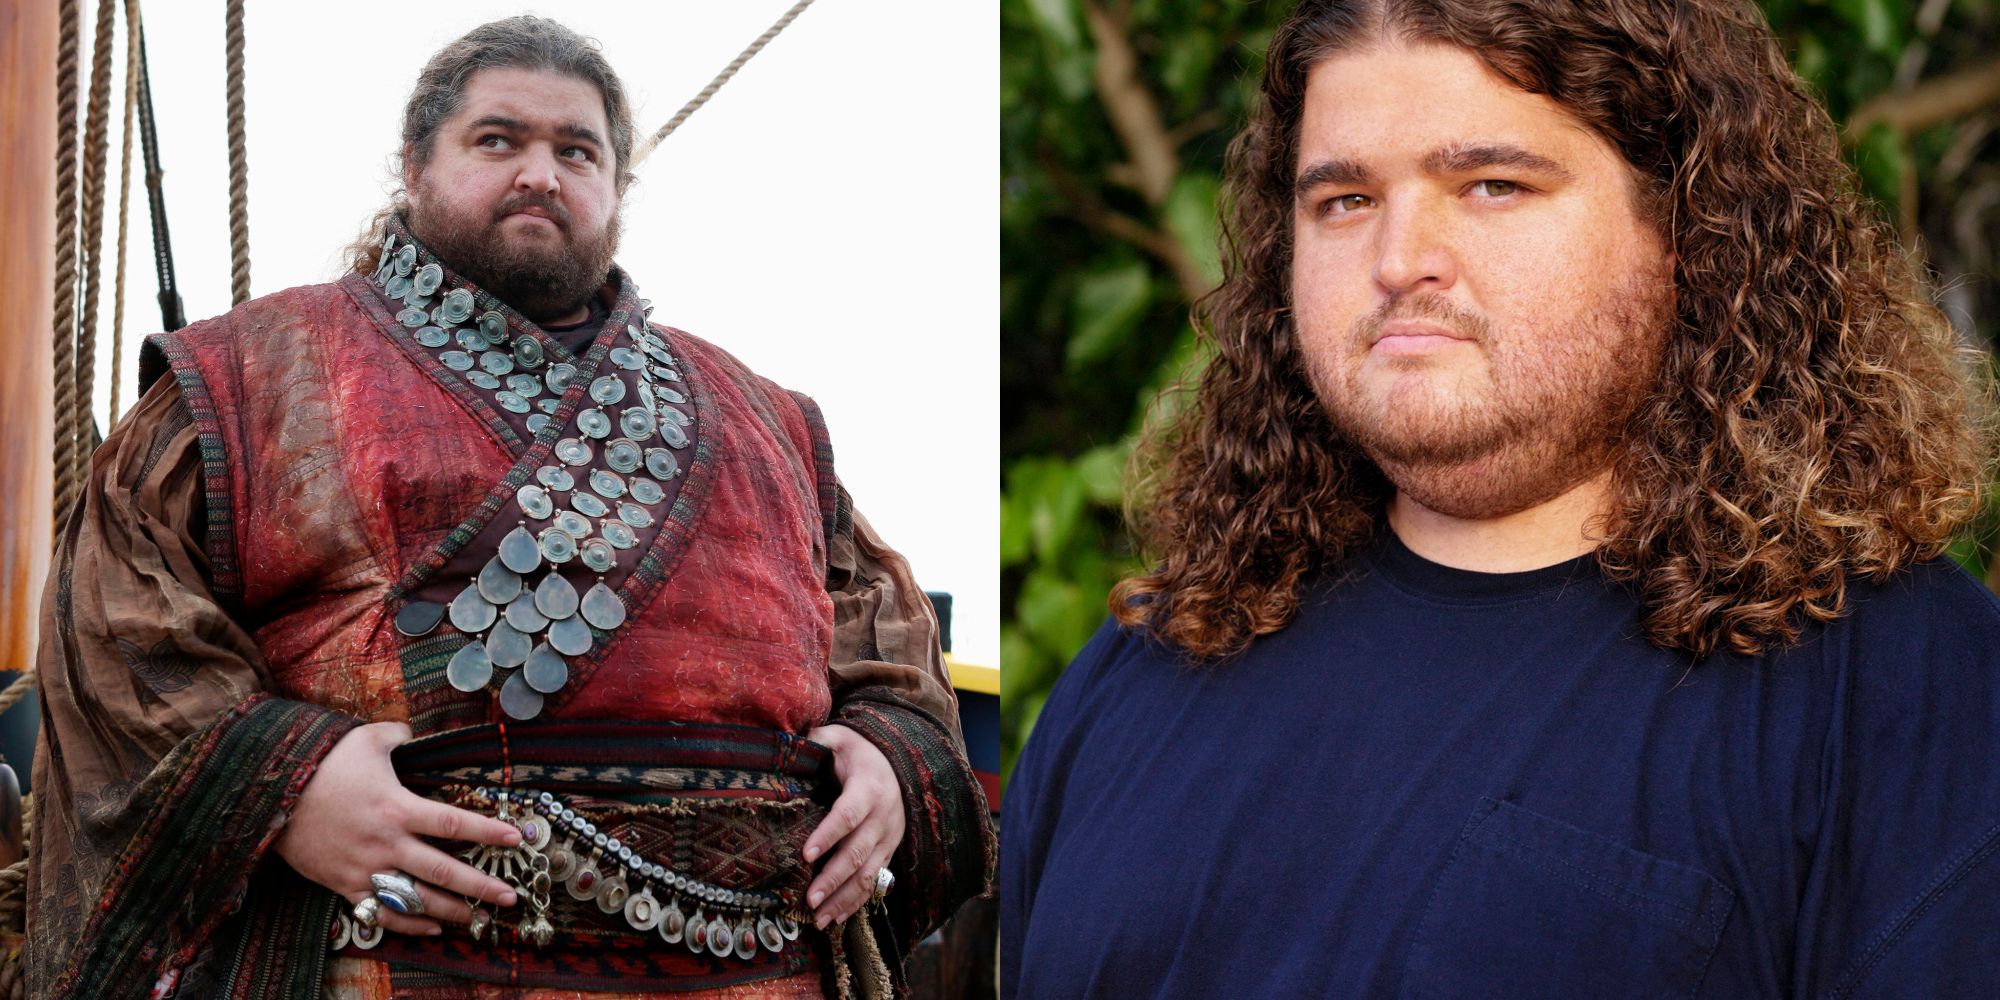 Jorge Garcia plays Anton and Hurley in Once Upon a Time and Lost